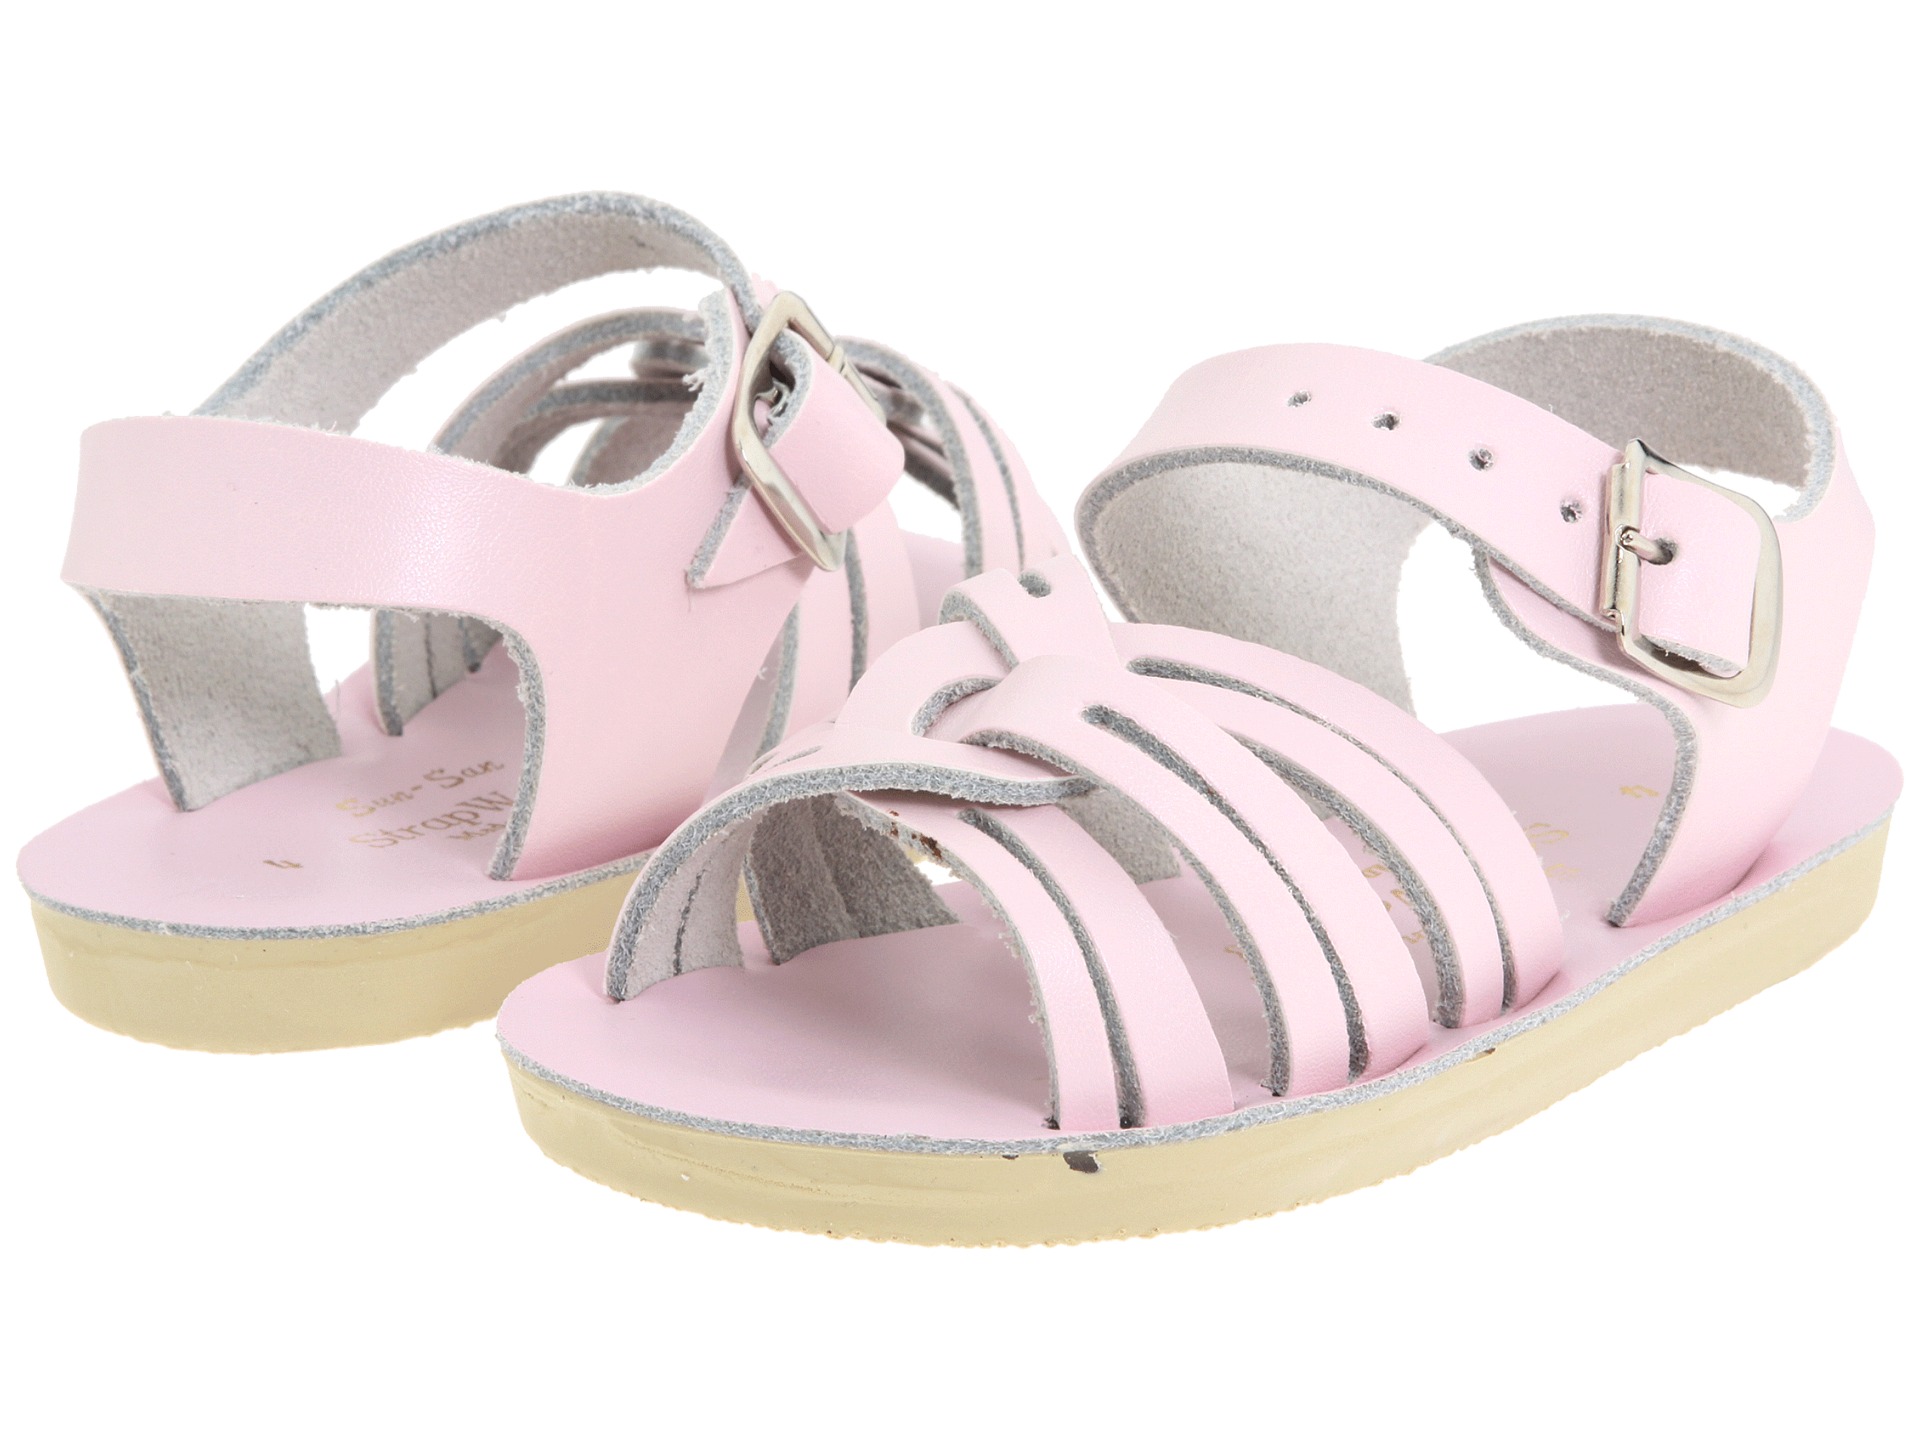 Salt Water Sandal by Hoy Shoes Sun San   Strap Wees (Infant)    